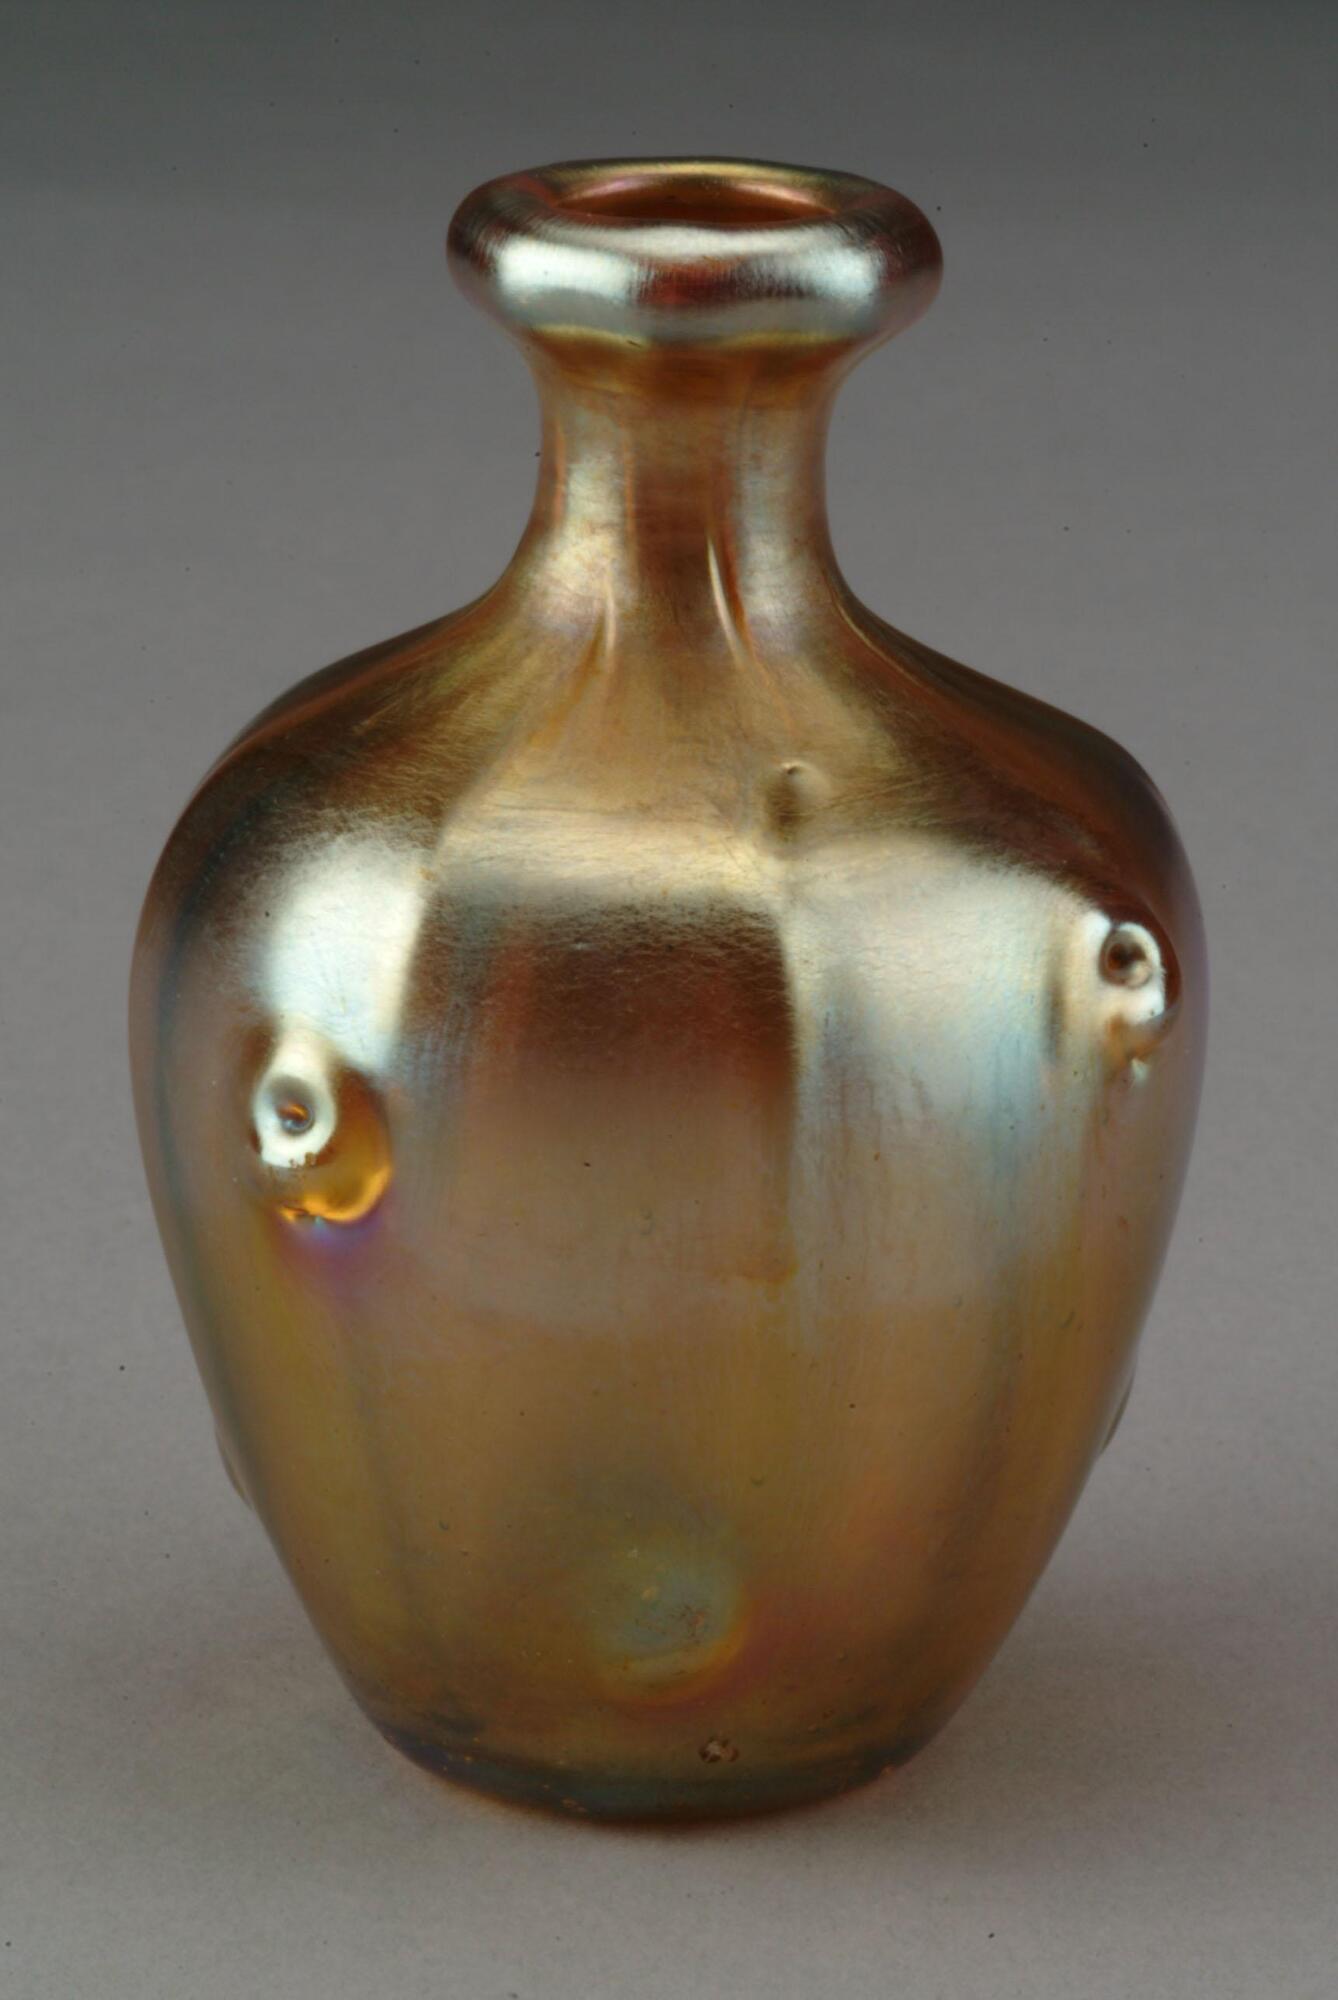 irridescent neutral-colored glass vessel with wide body, narrow neck and thick lip